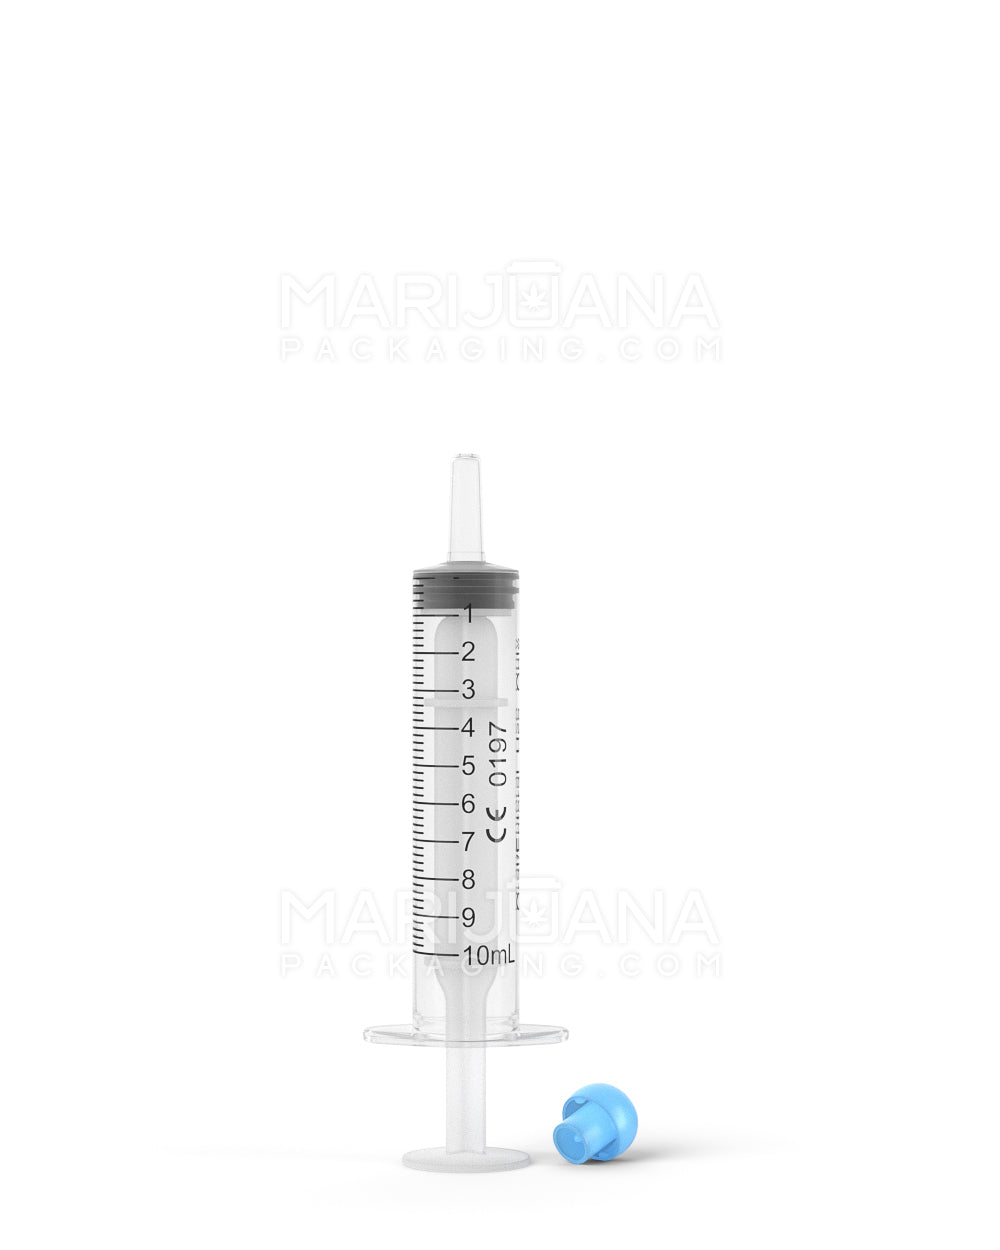 Plastic Oral Concentrate Syringes | 10mL - 1mL Increments | Sample - 9